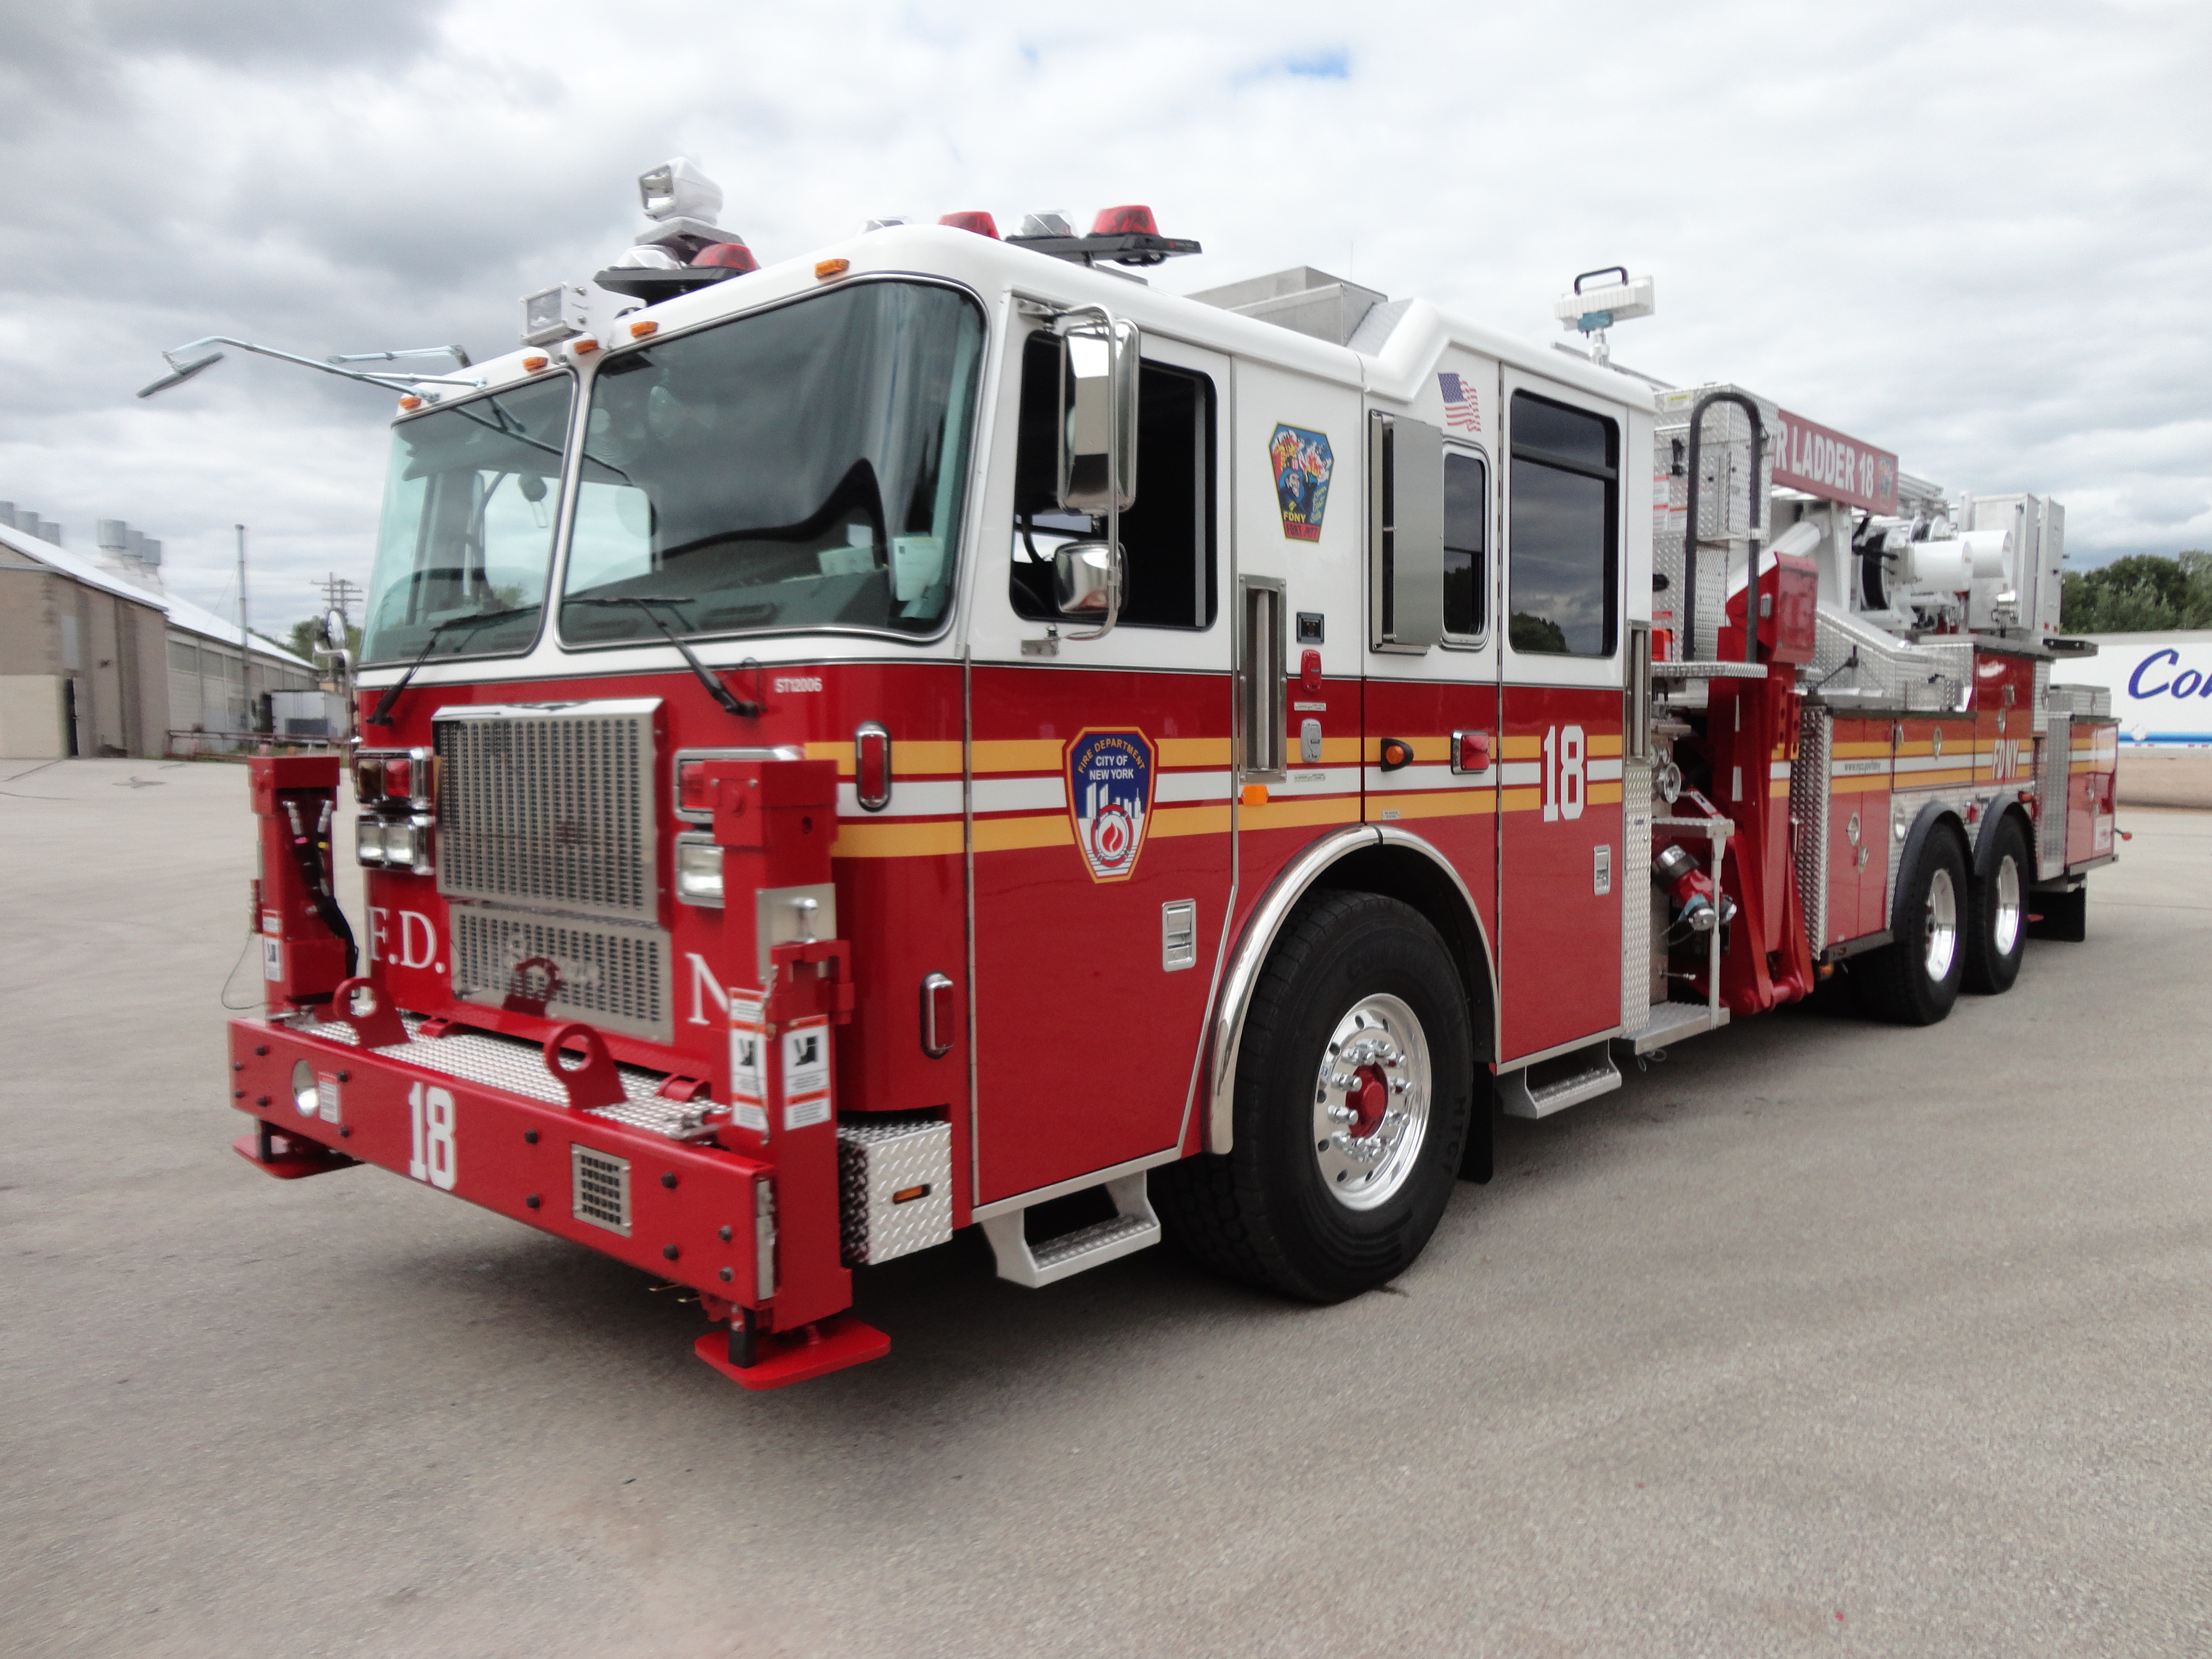 HQ Seagrave Fire Truck Wallpapers | File 5972.81Kb